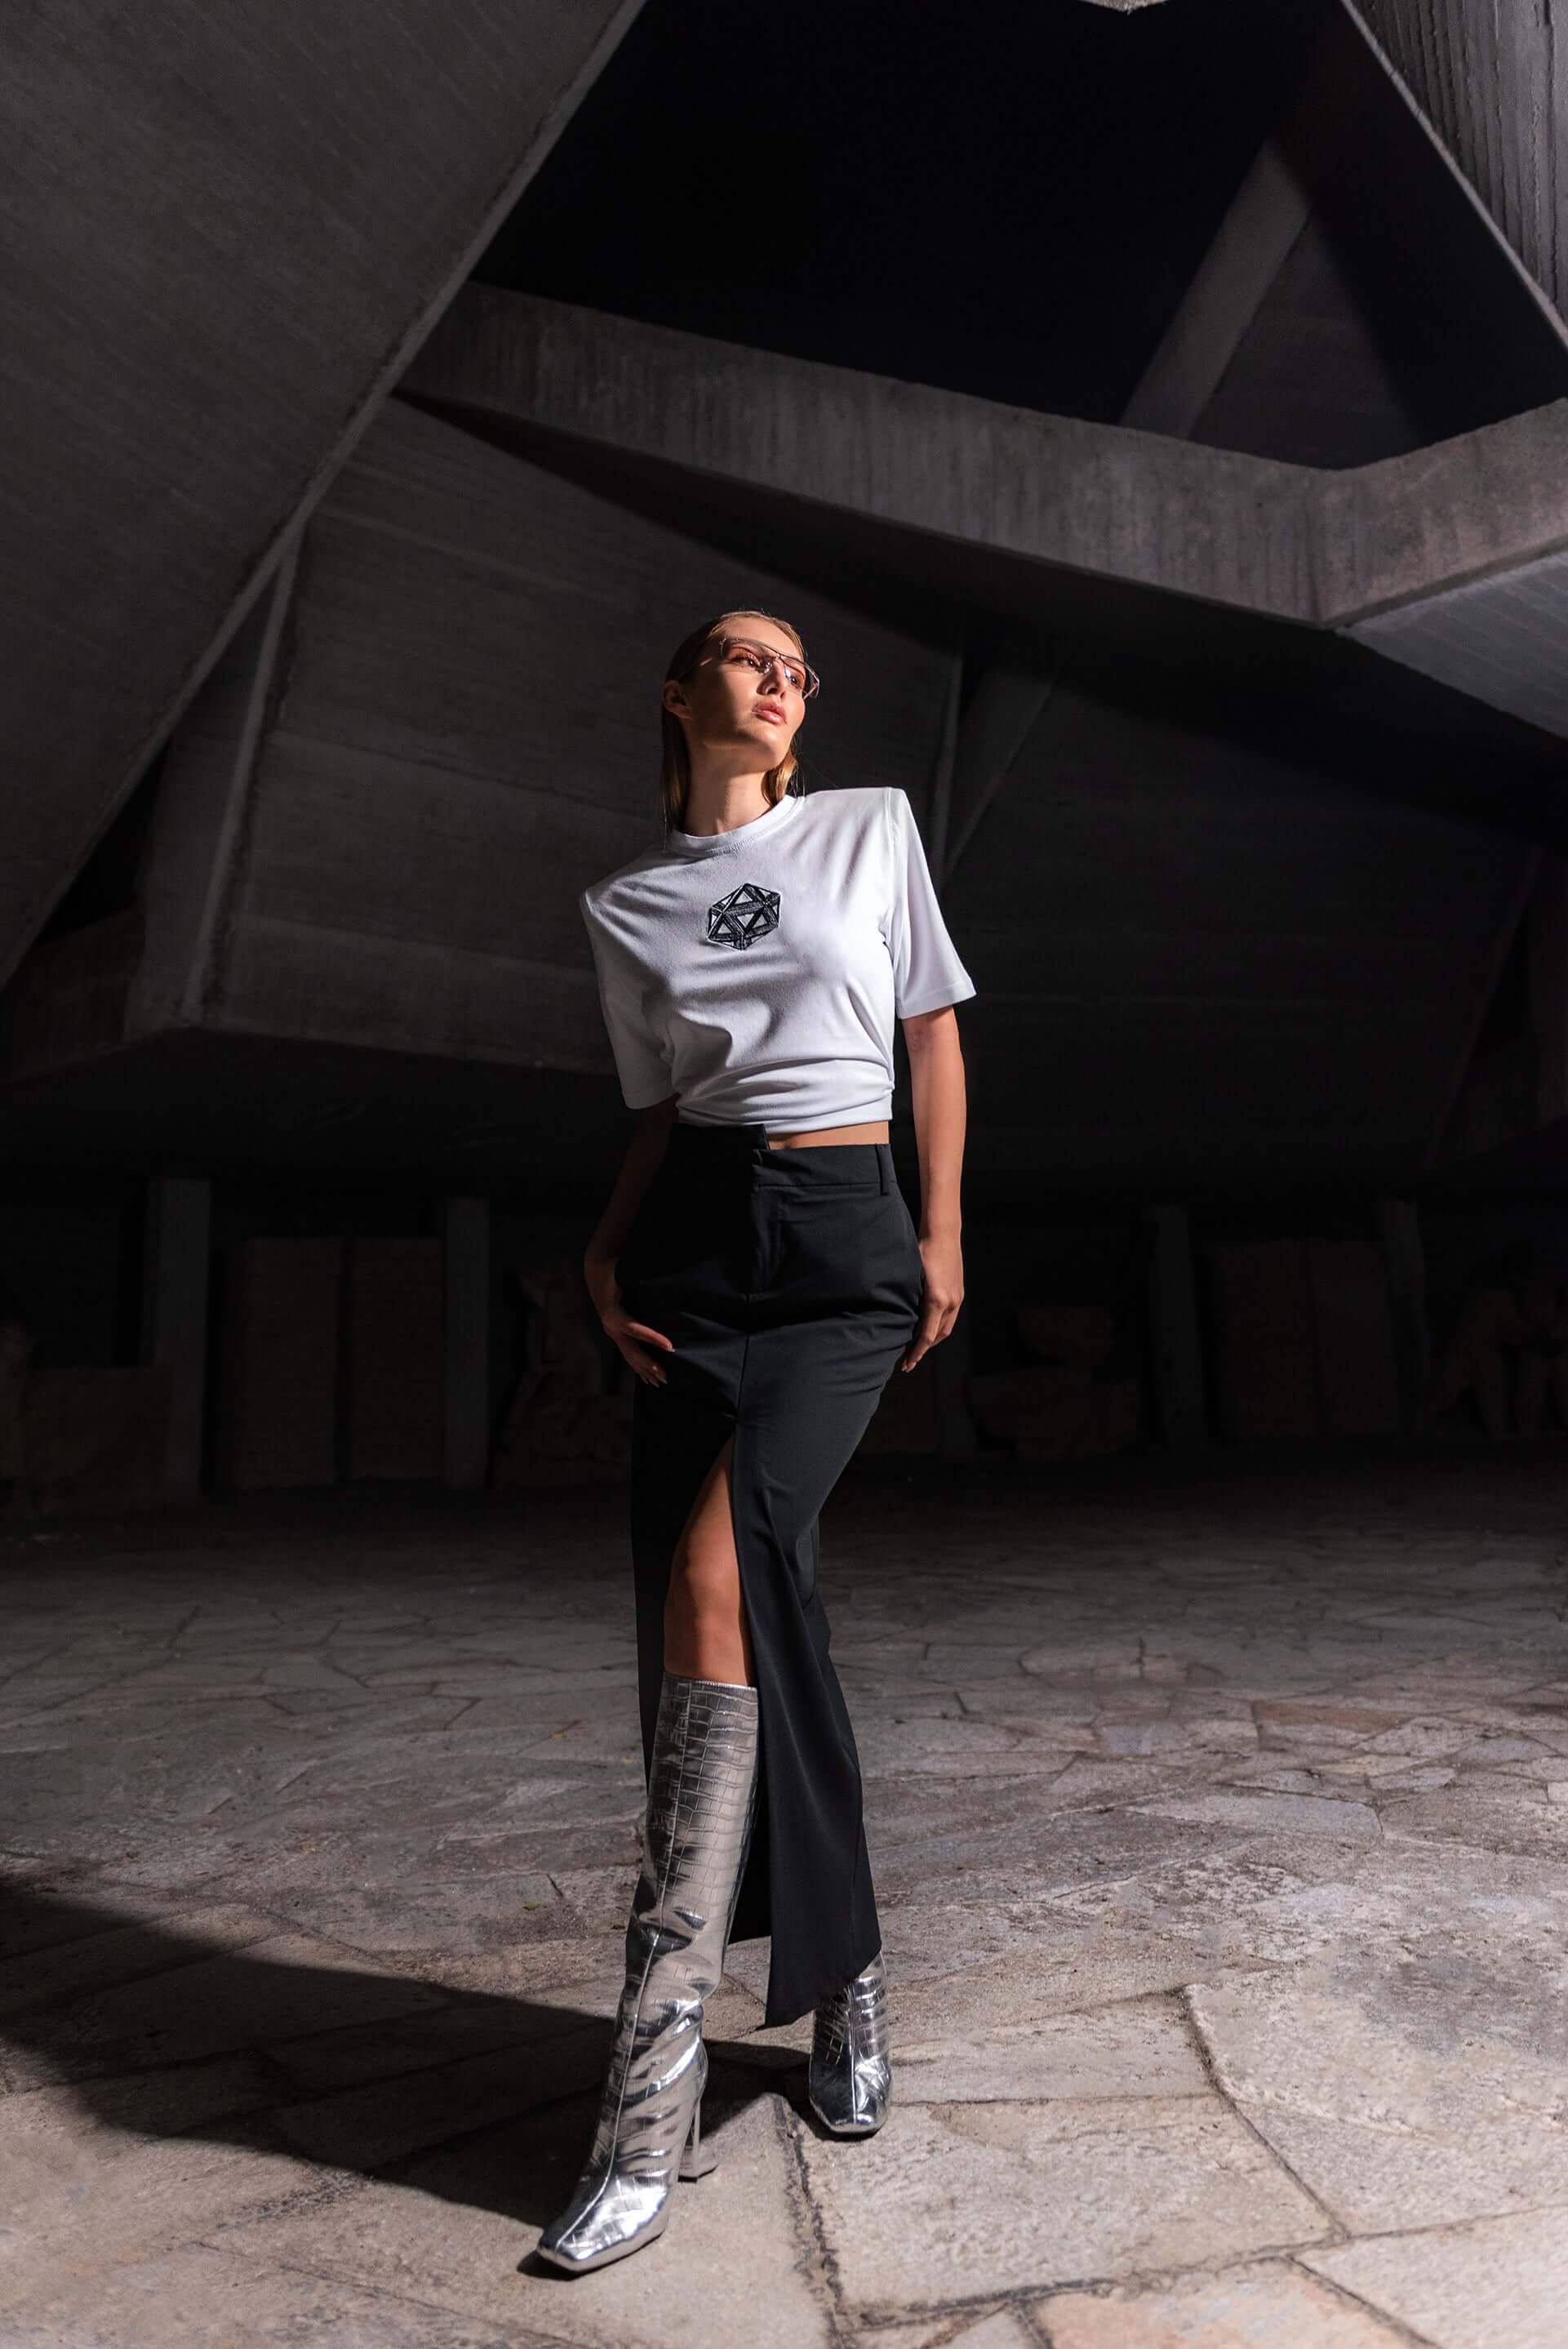 The model wears a white, oversized silhouette t-shirt with ICOSahedron embroidery in black. The outfit also contains a long skirt with a slit, boots and sunglasses, complimenting the white t-shirt with ICOSahedron embroidery. An editorial photograph in an architectural monument in Plovdiv, Bulgaria.